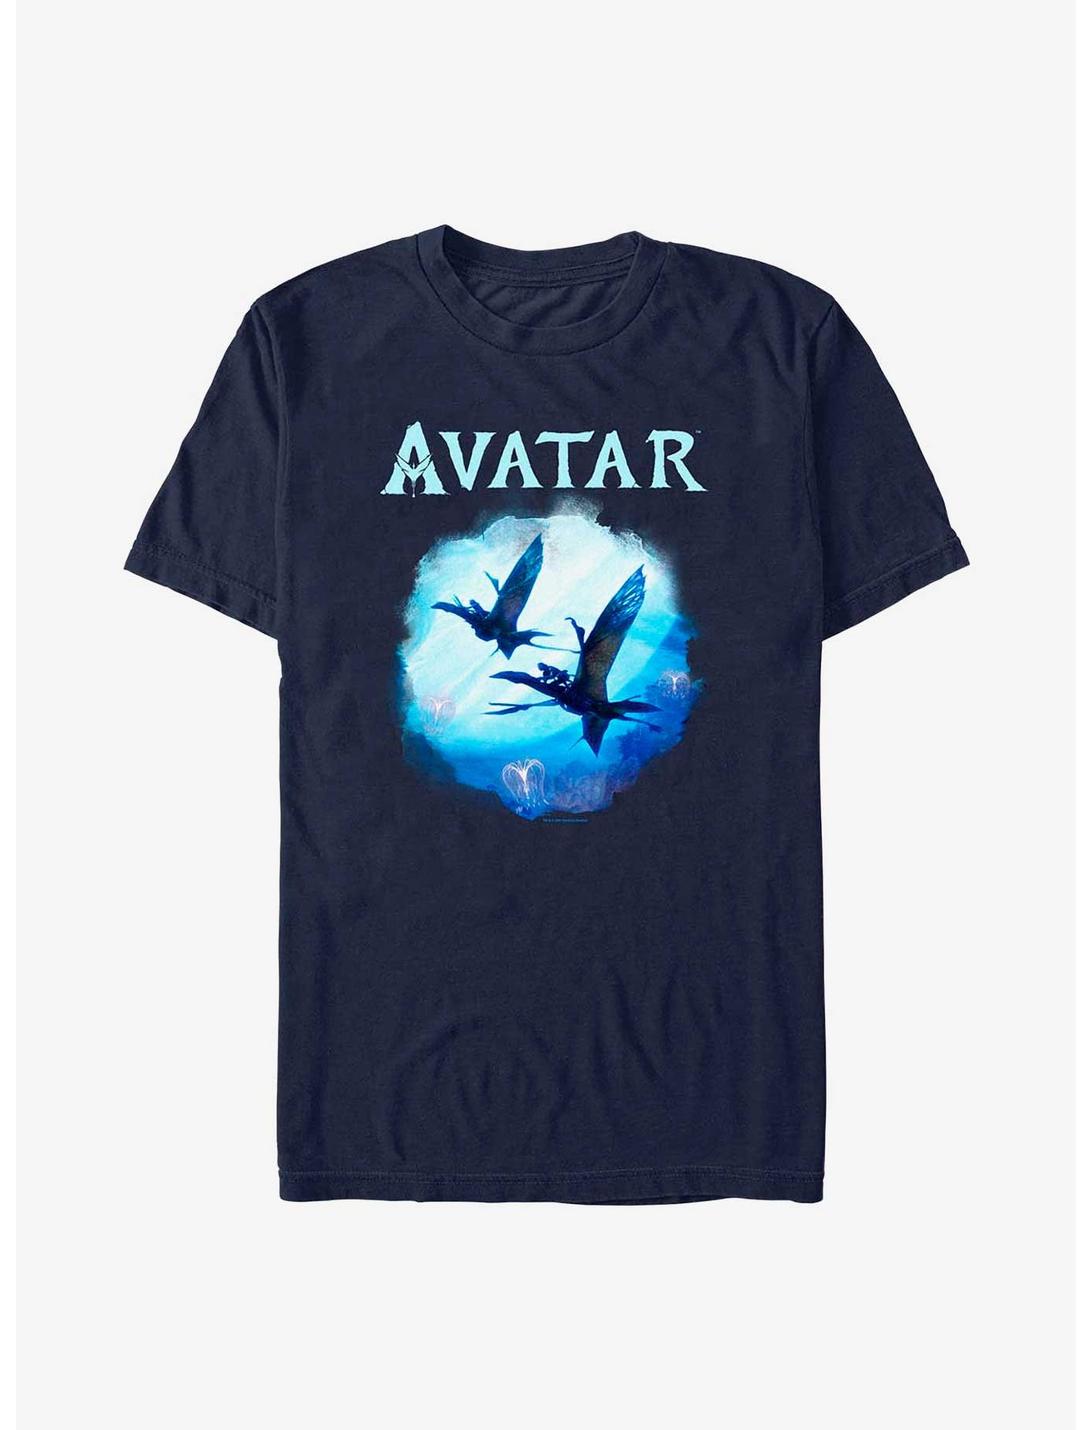 Avatar: The Way of Water Look To The Sky T-Shirt, NAVY, hi-res